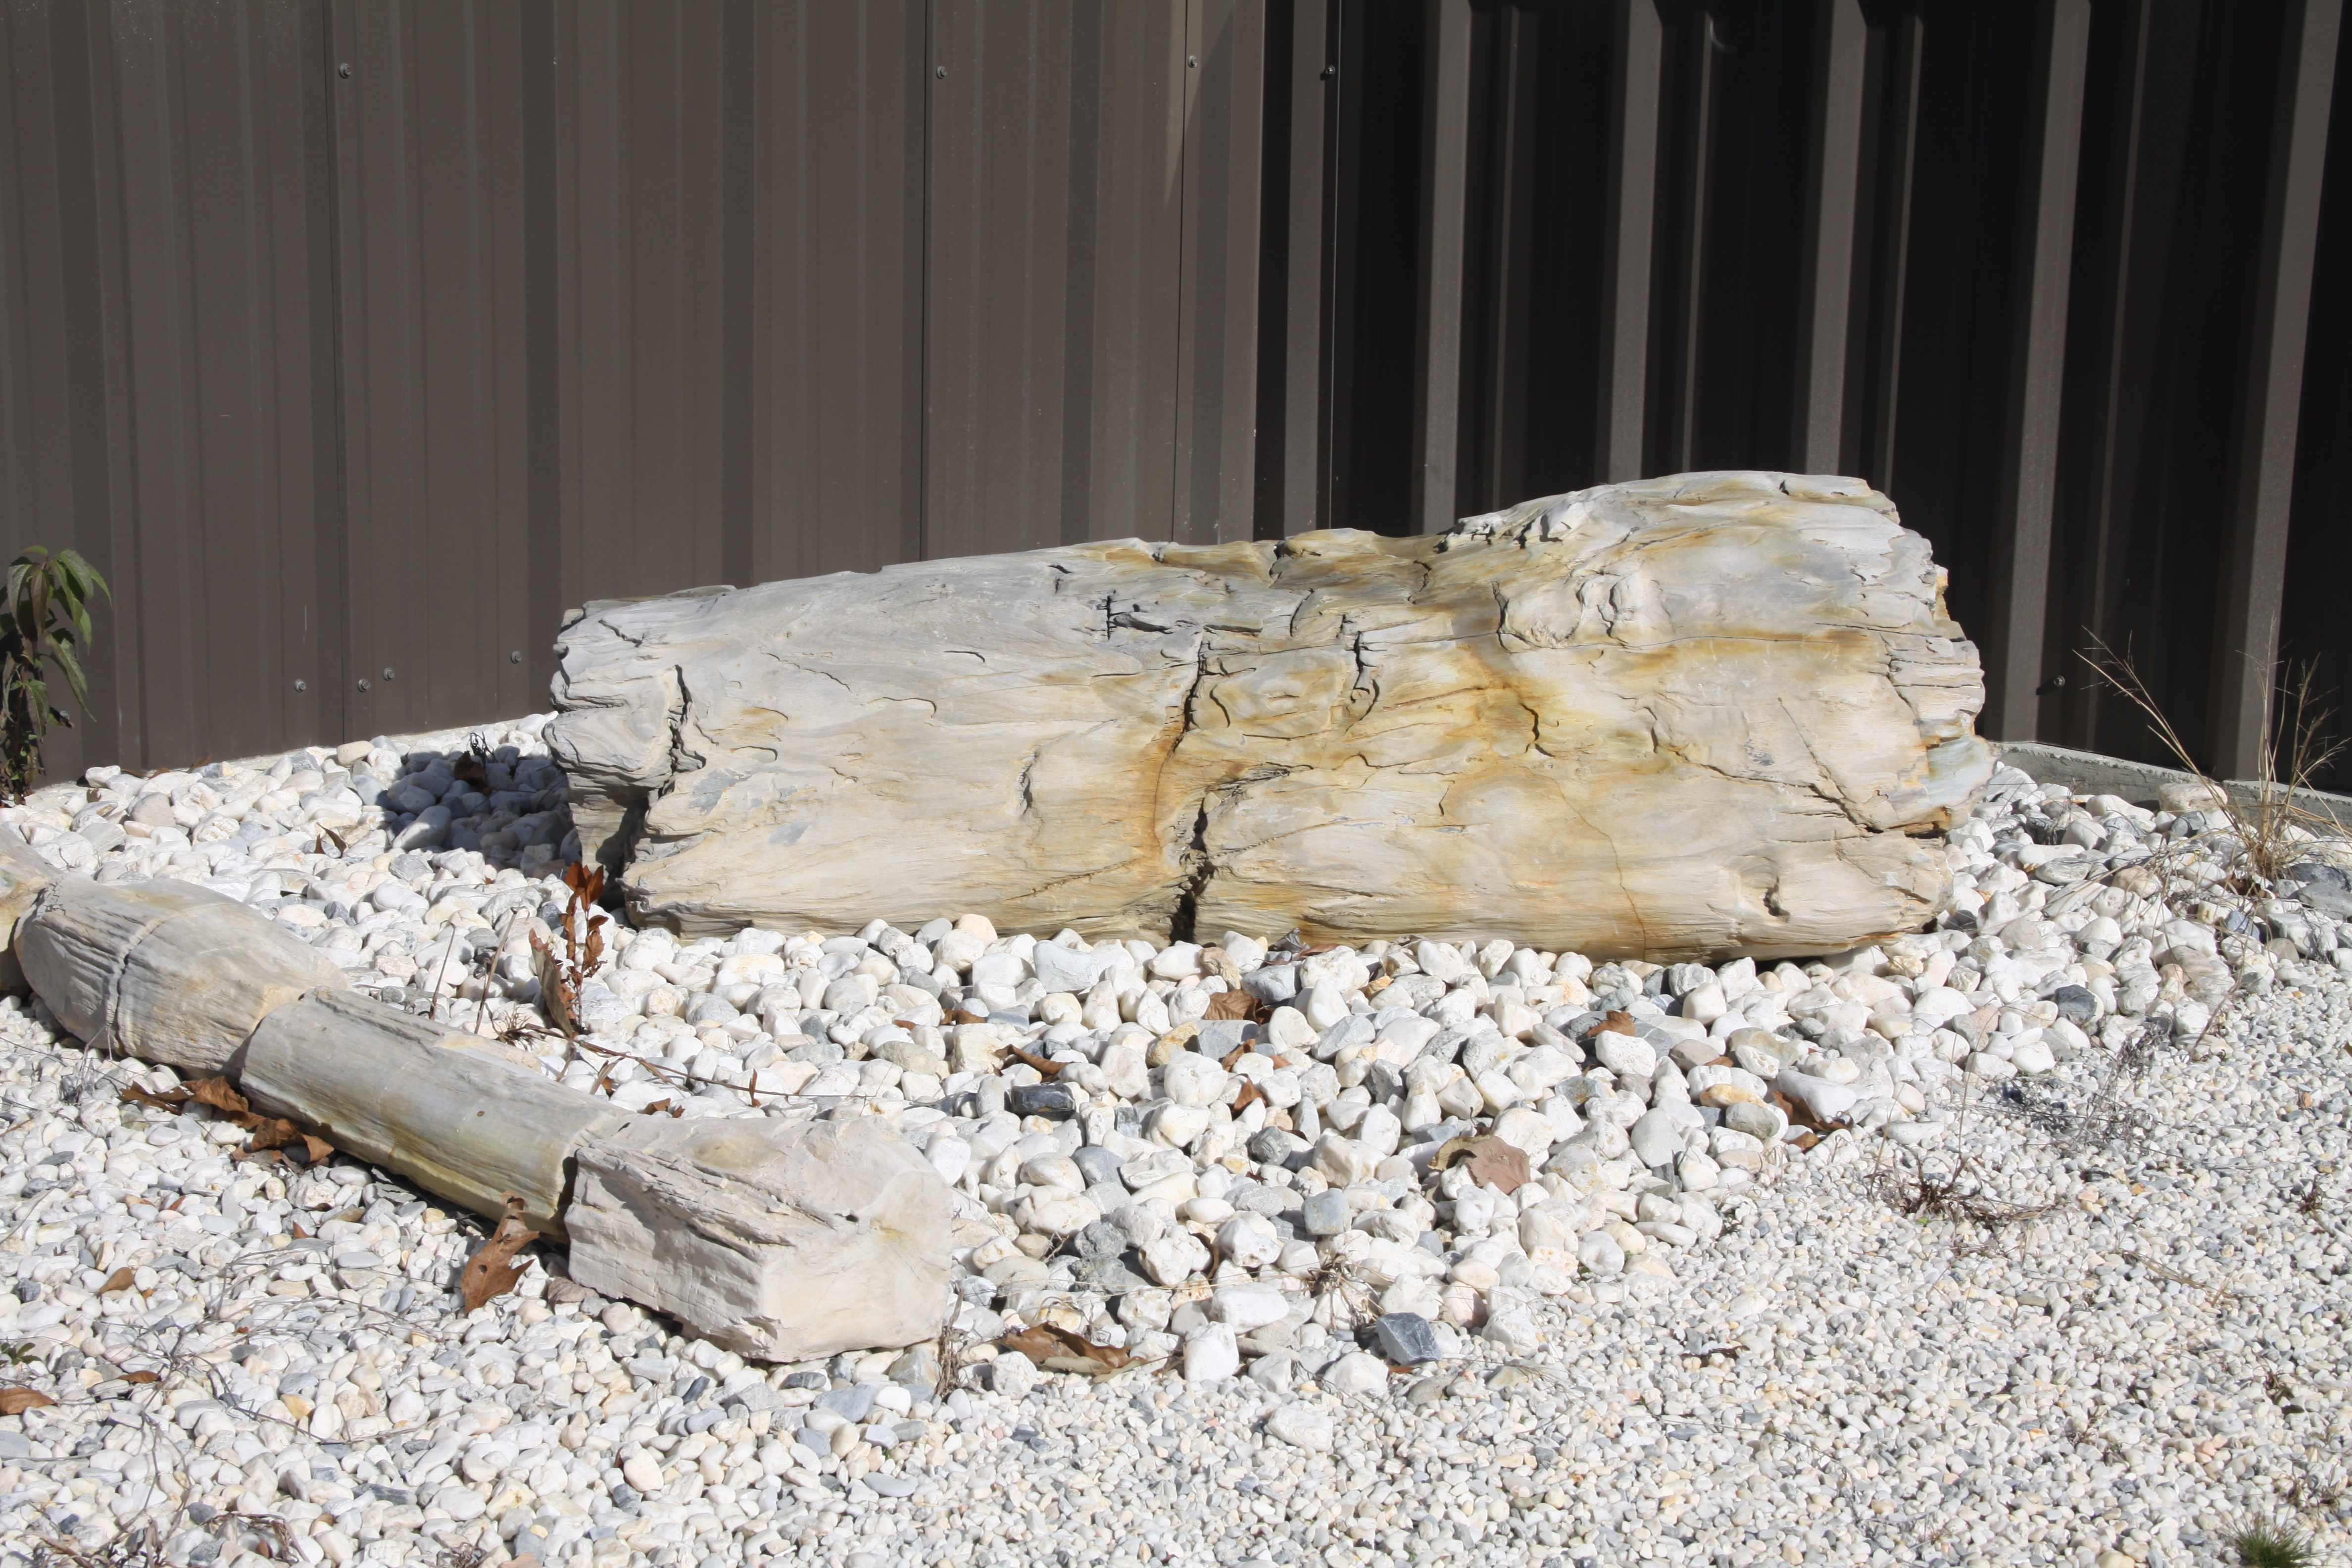 Petrified wood recovered from our deposit - Not available for purchase